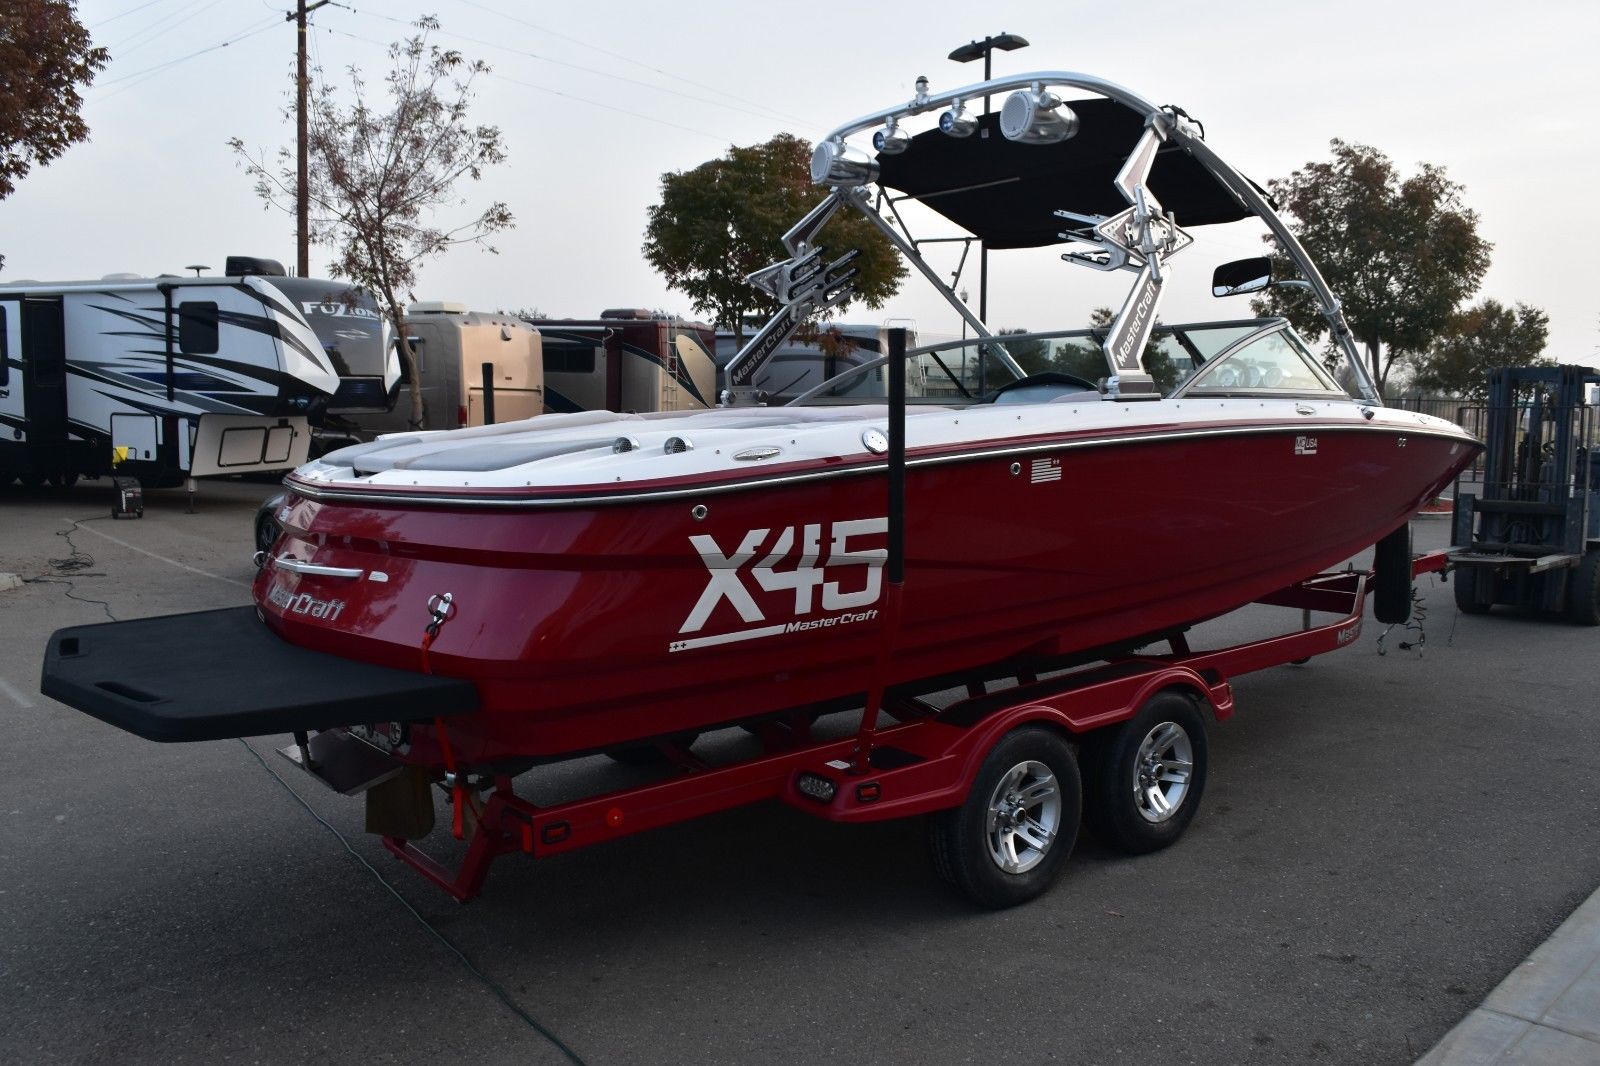 Mastercraft X45 2007 for sale for $49,000 - Boats-from-USA.com